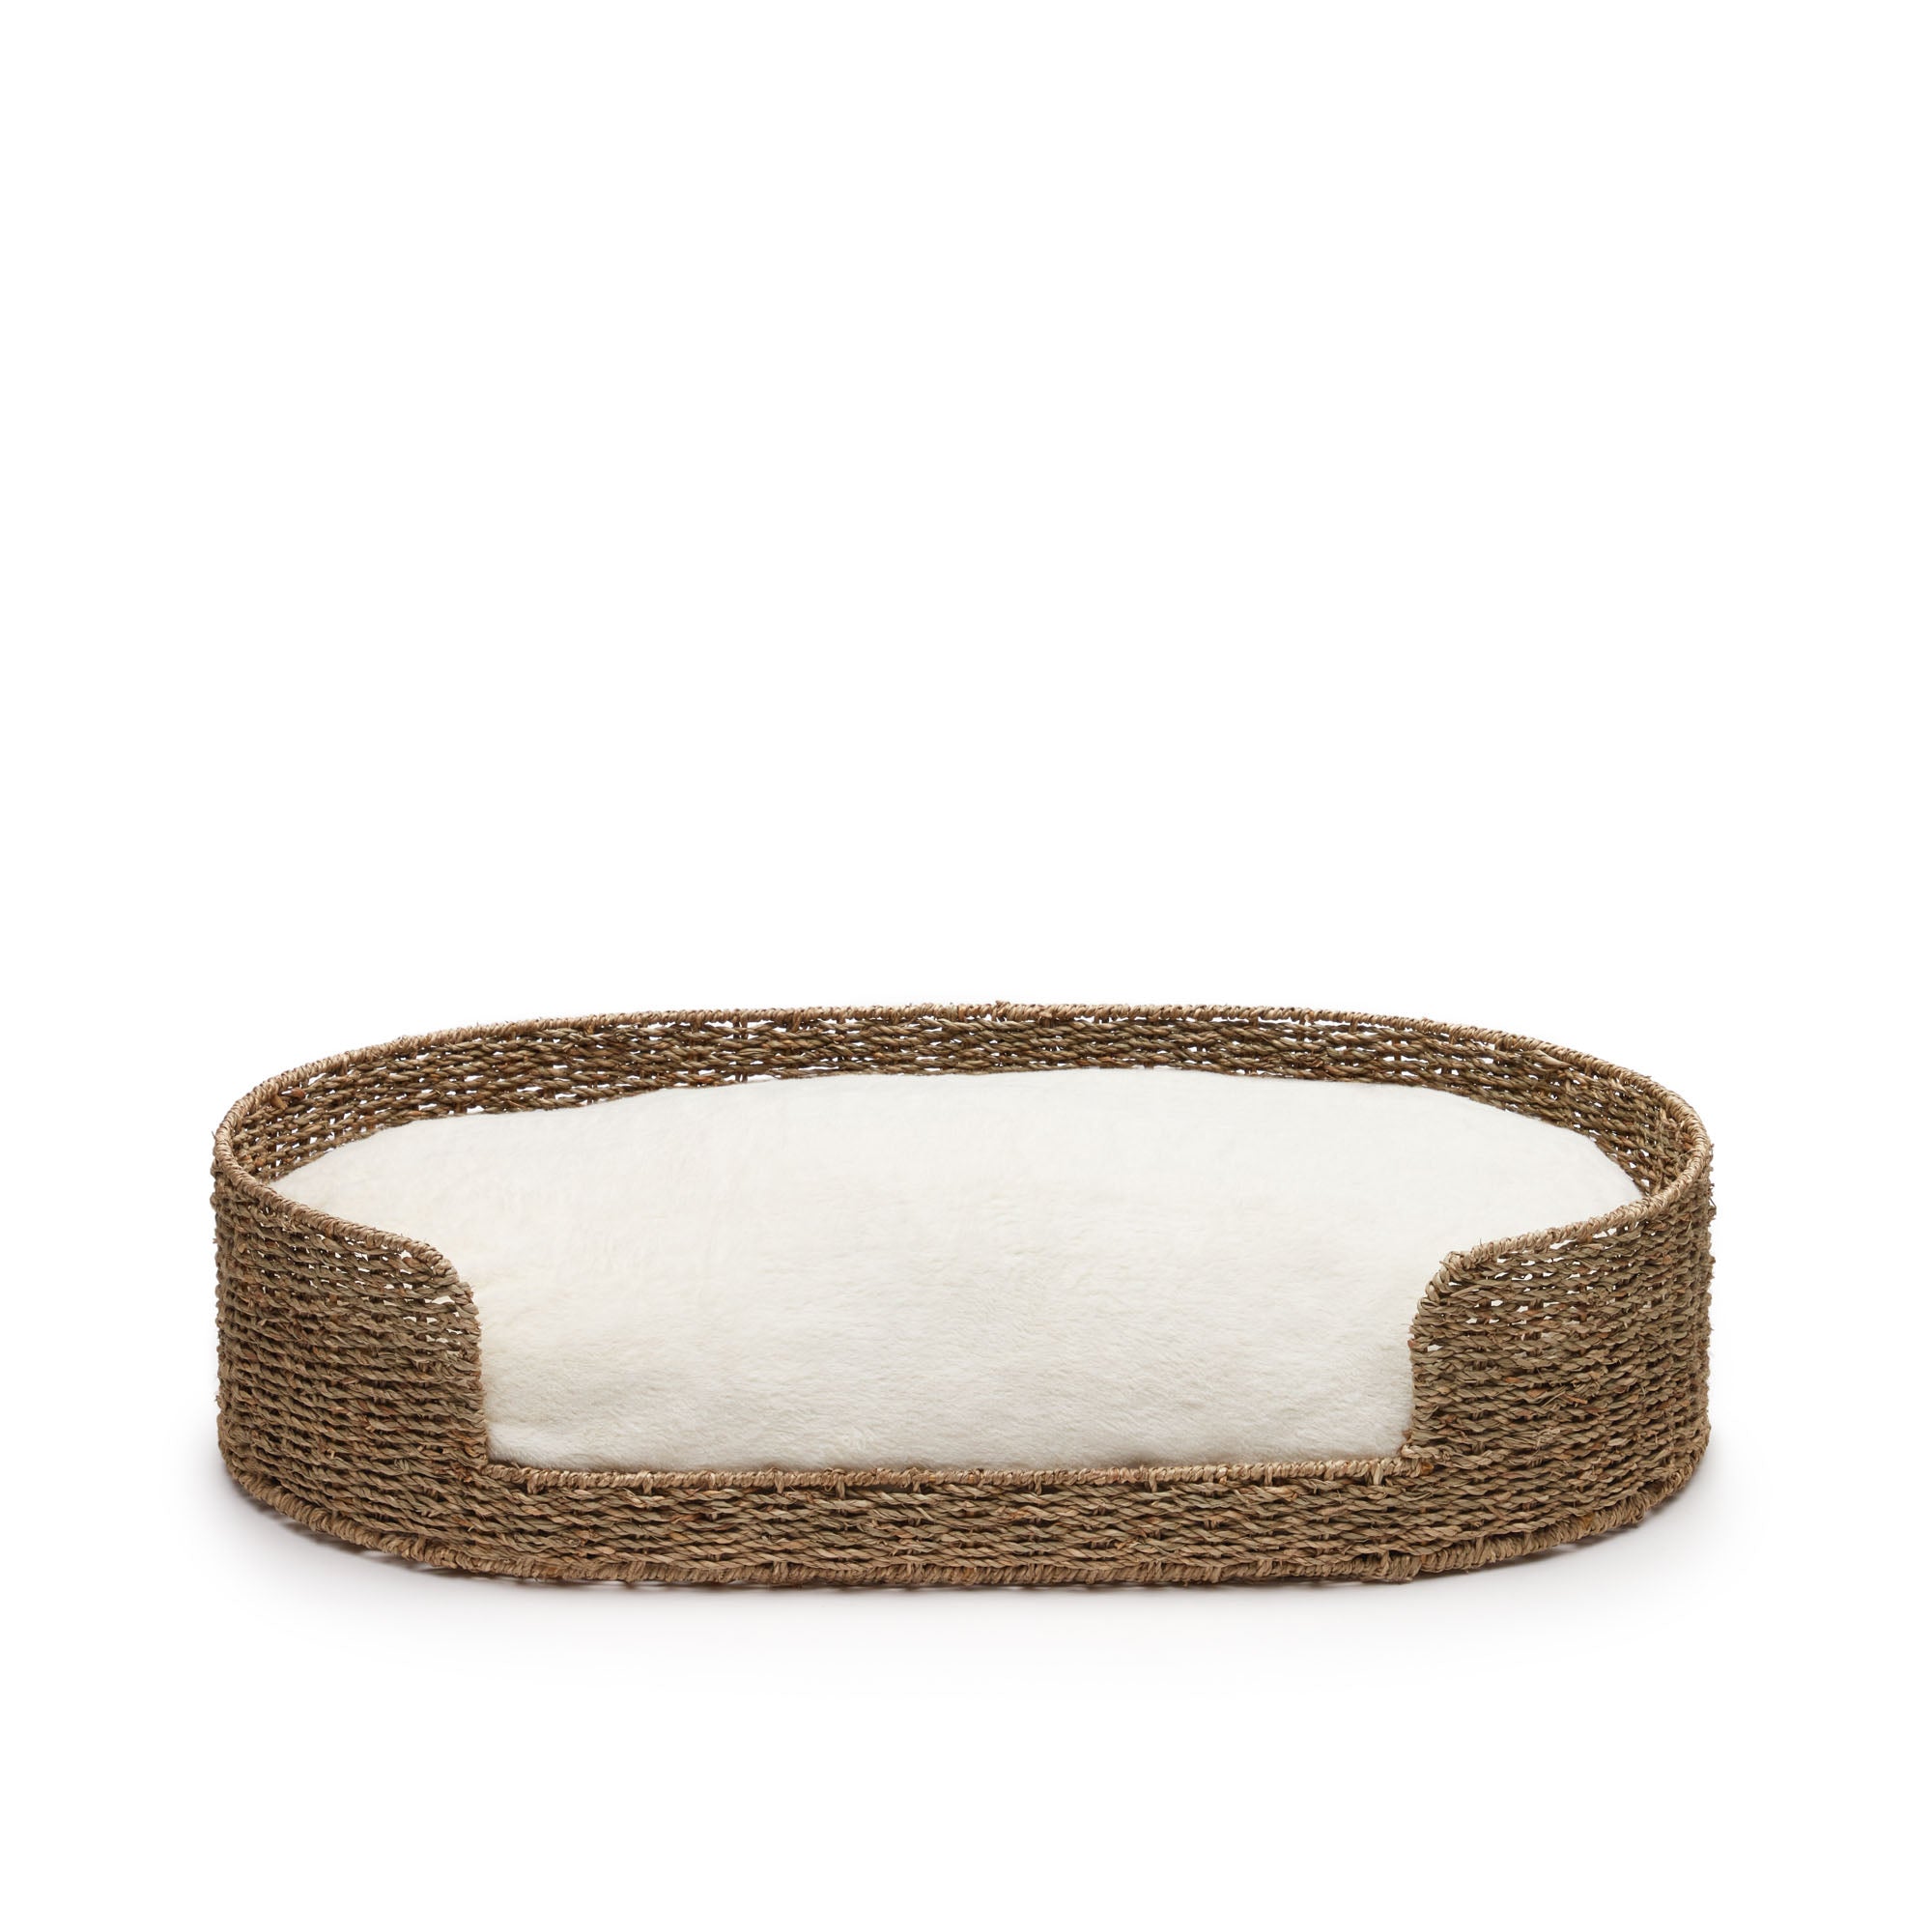 Fliicker bed for pets made of natural fibers Ø 80 x 45 cm